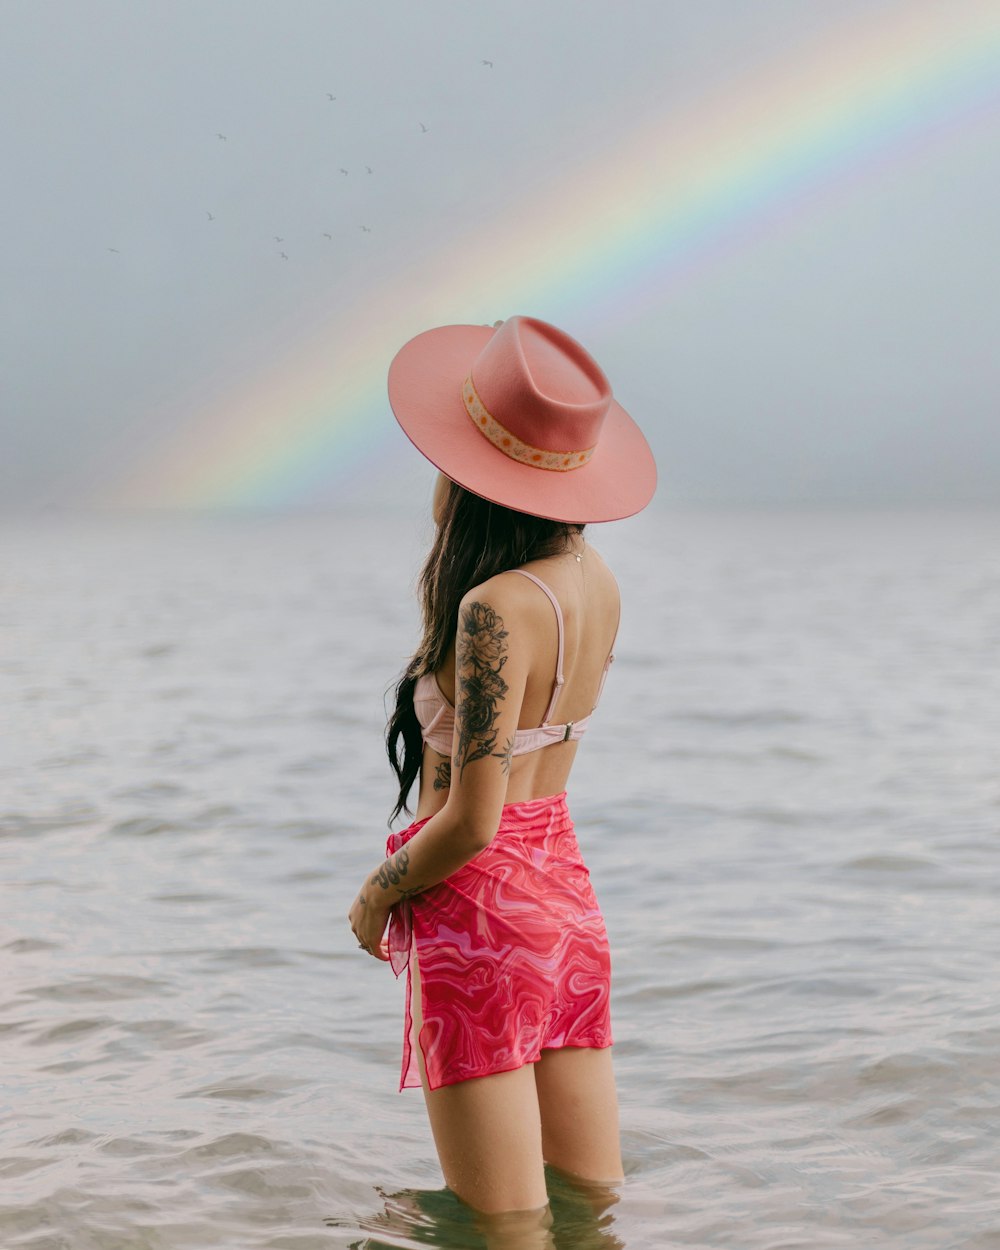 a woman in a garment and hat standing in water with a rainbow